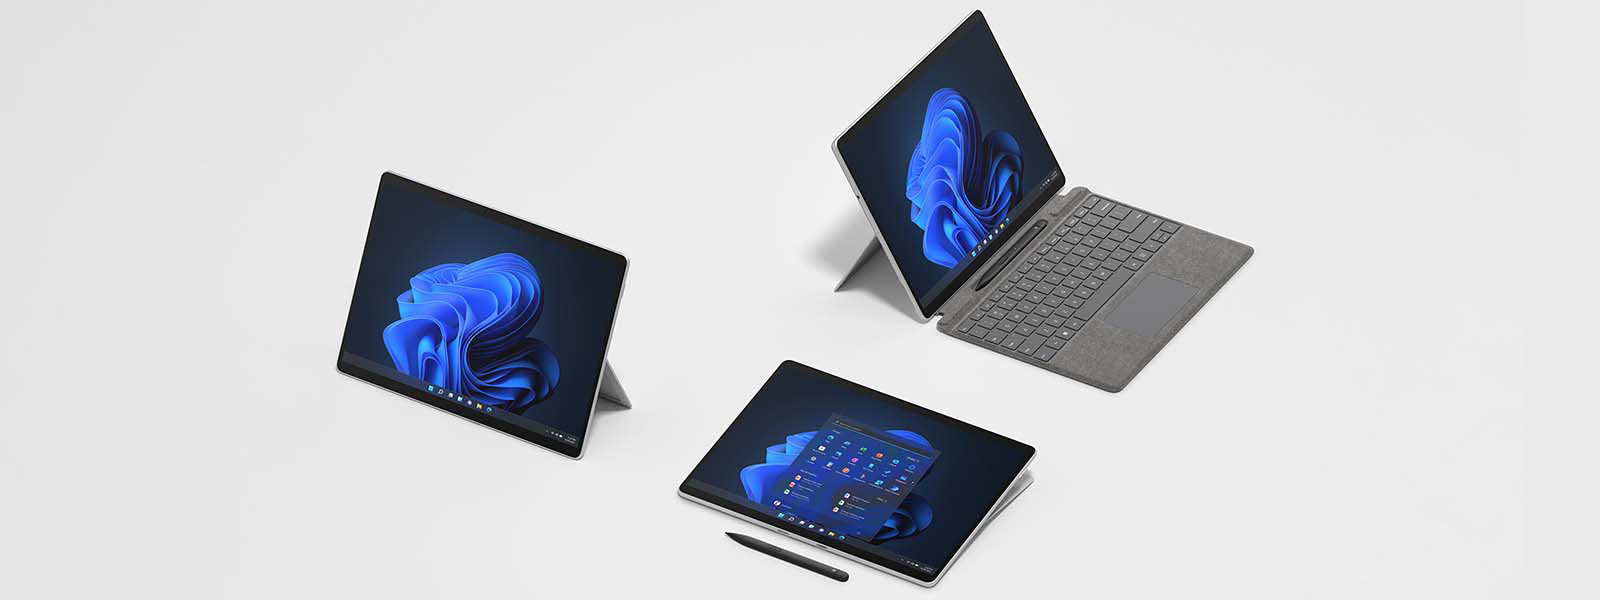 Render image showing Surface Pro 8 in various modes